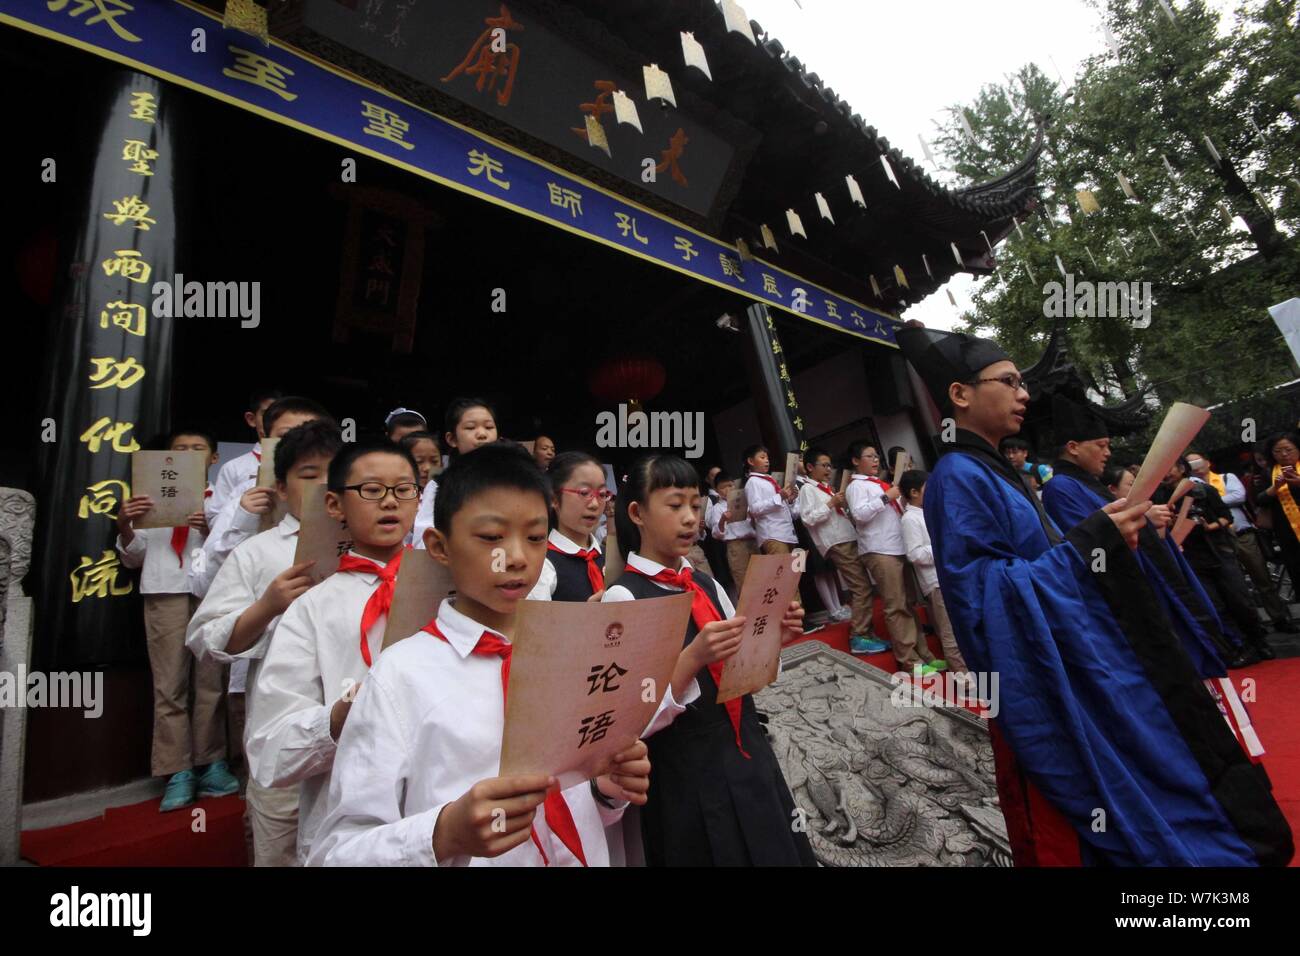 Young students read aloud the Analects of Confucius during a ritual to mark the 2,568th anniversary of the birth of the great Chinese philosopher Conf Stock Photo